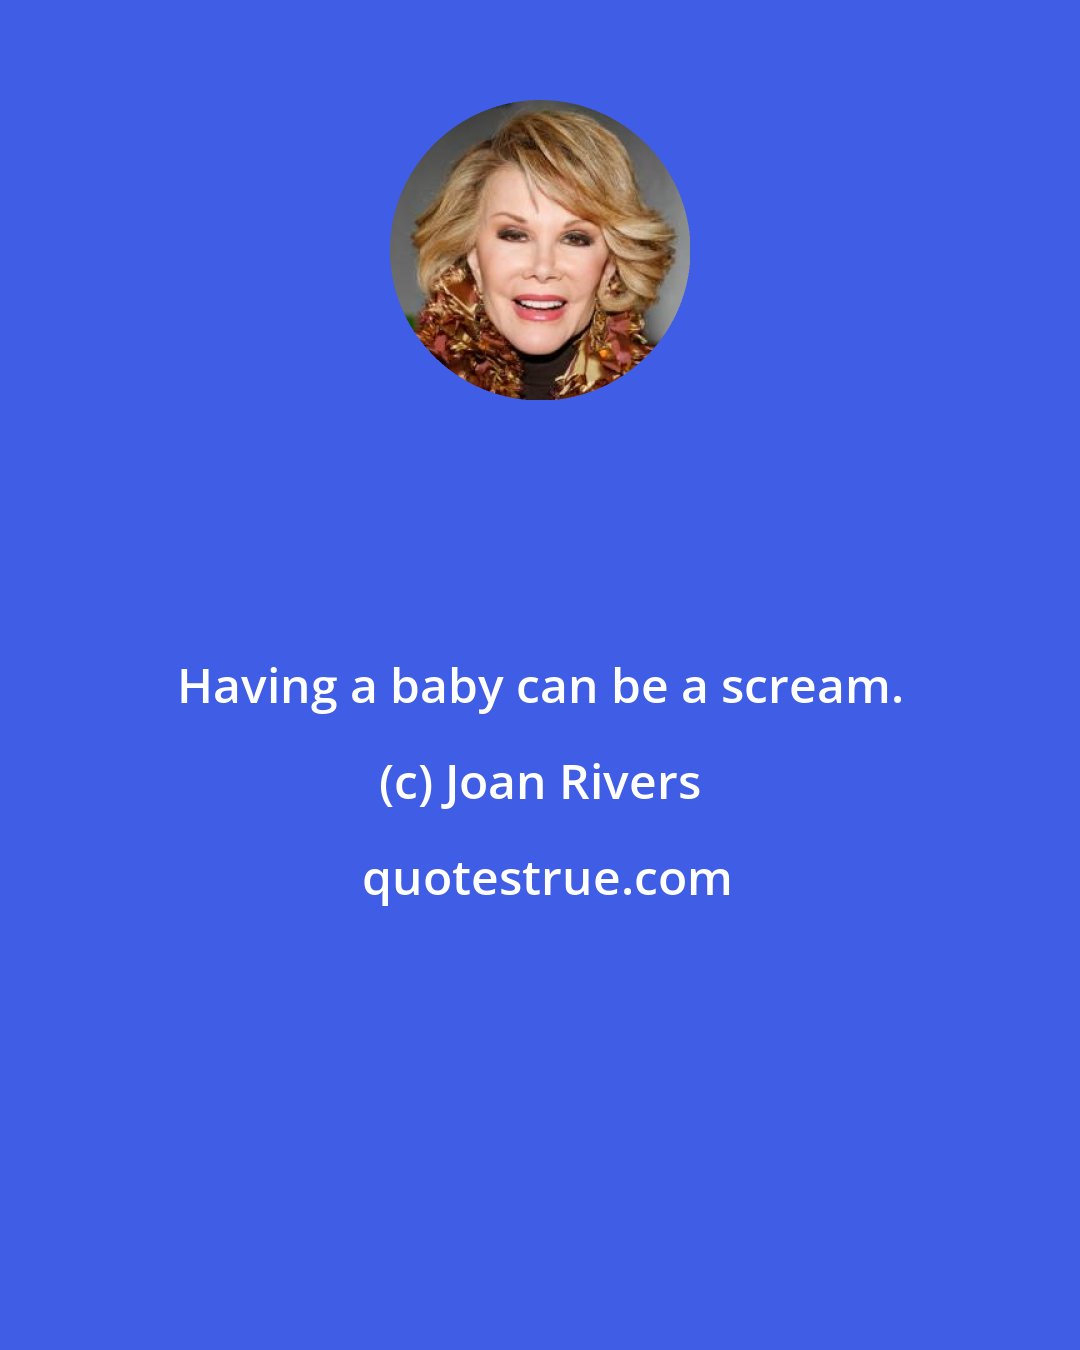 Joan Rivers: Having a baby can be a scream.